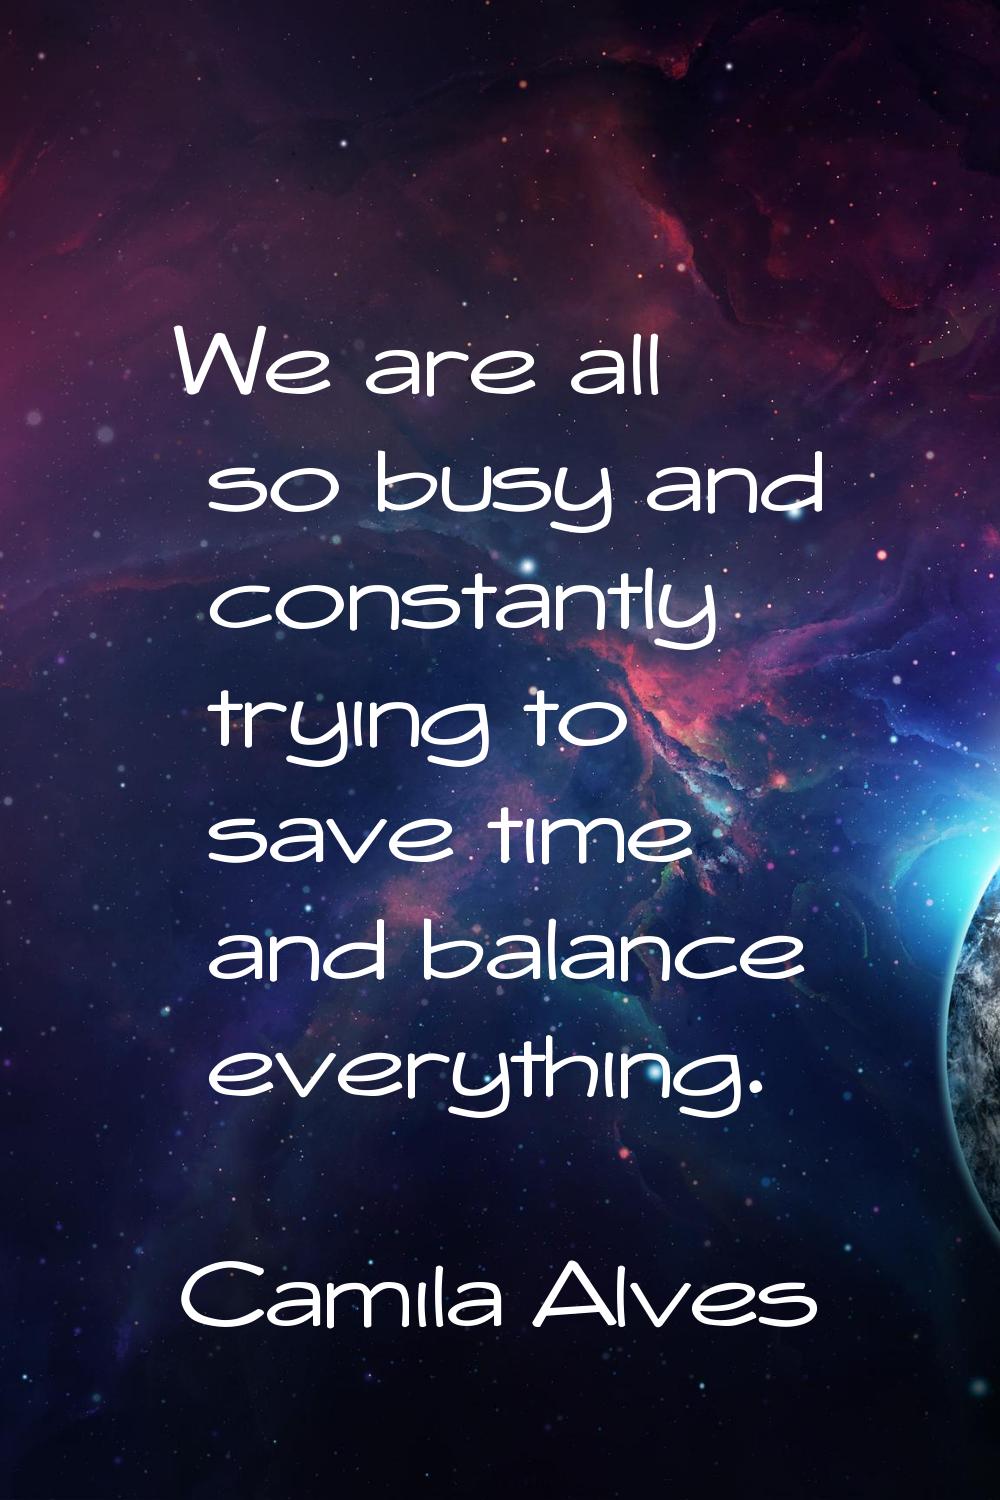 We are all so busy and constantly trying to save time and balance everything.